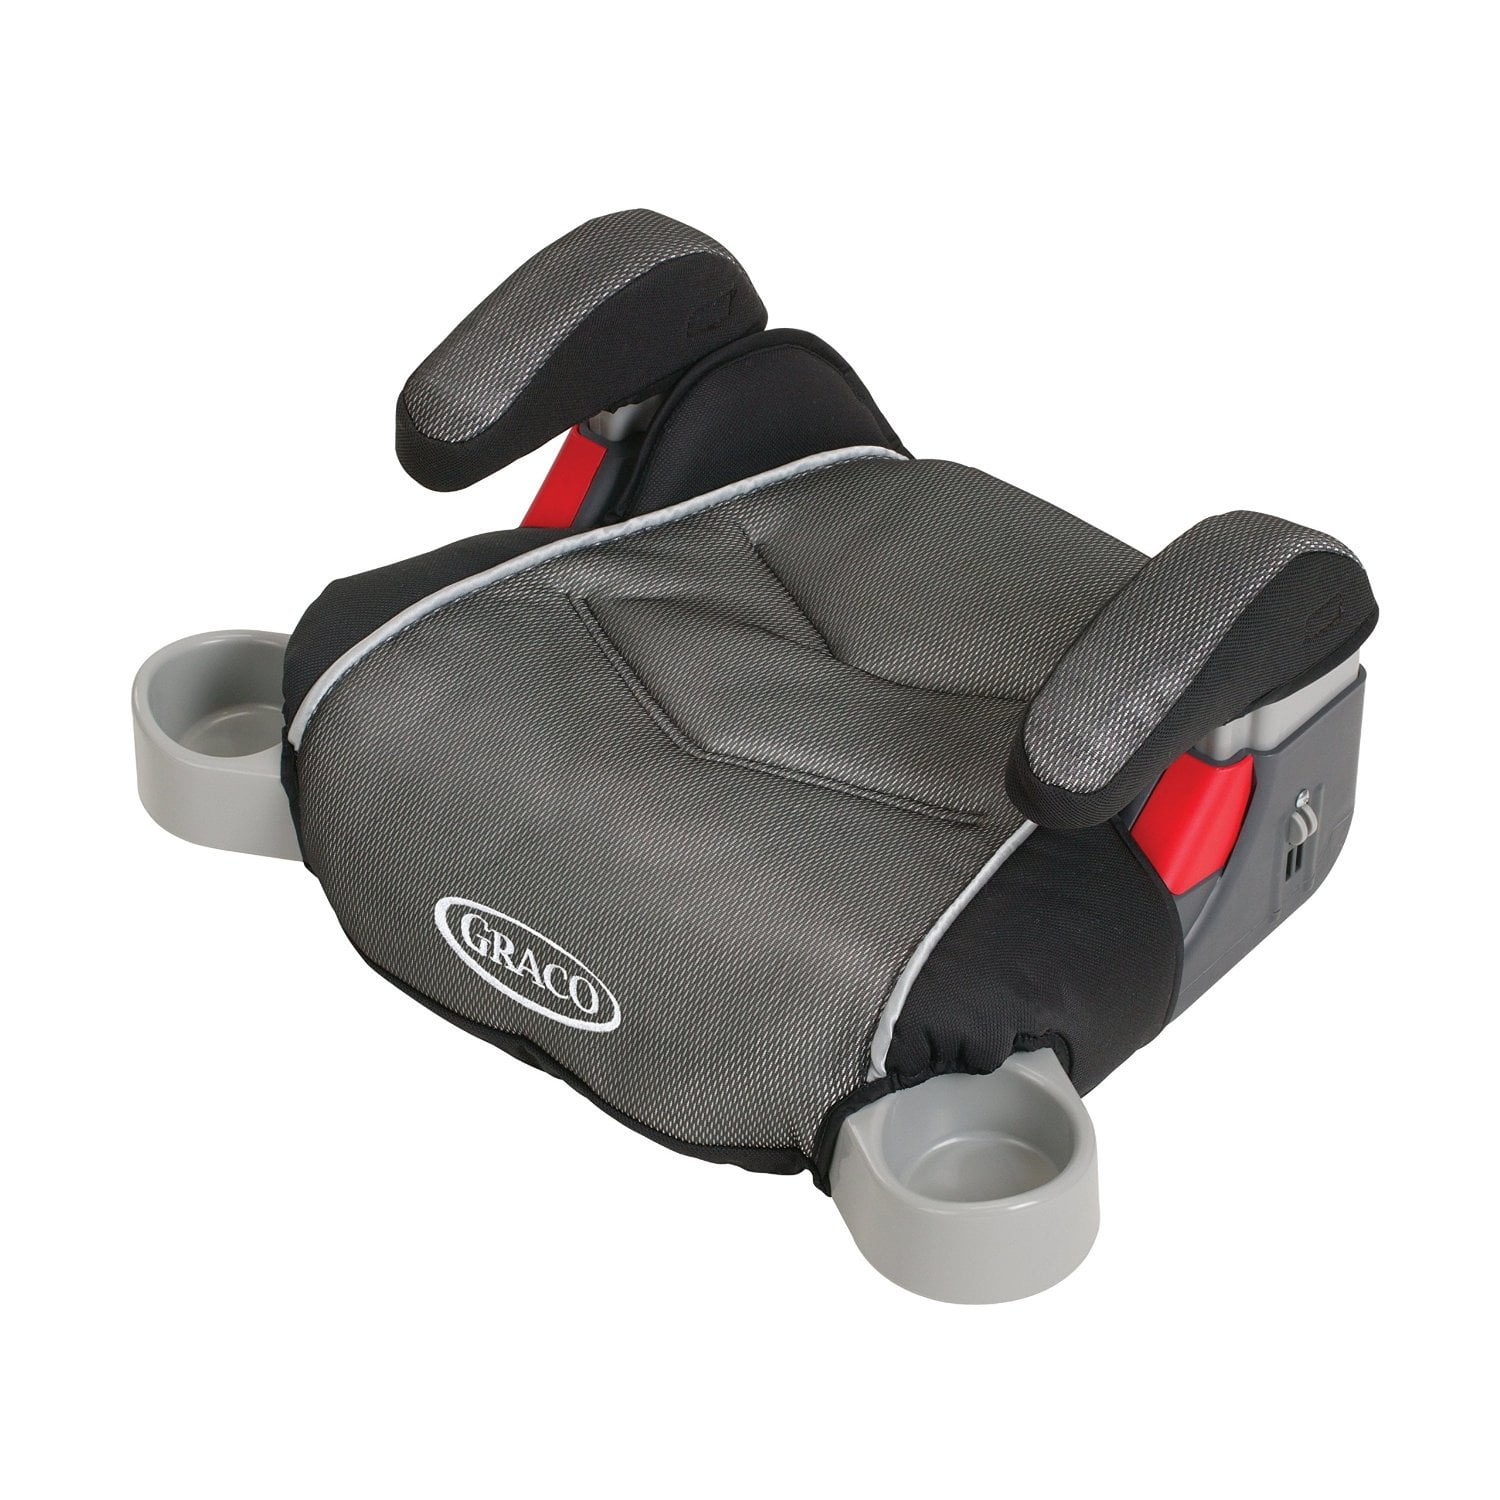 Photo 1 of Graco TurboBooster Backless Booster Car Seat, Galaxy Gray, MINOR USE 